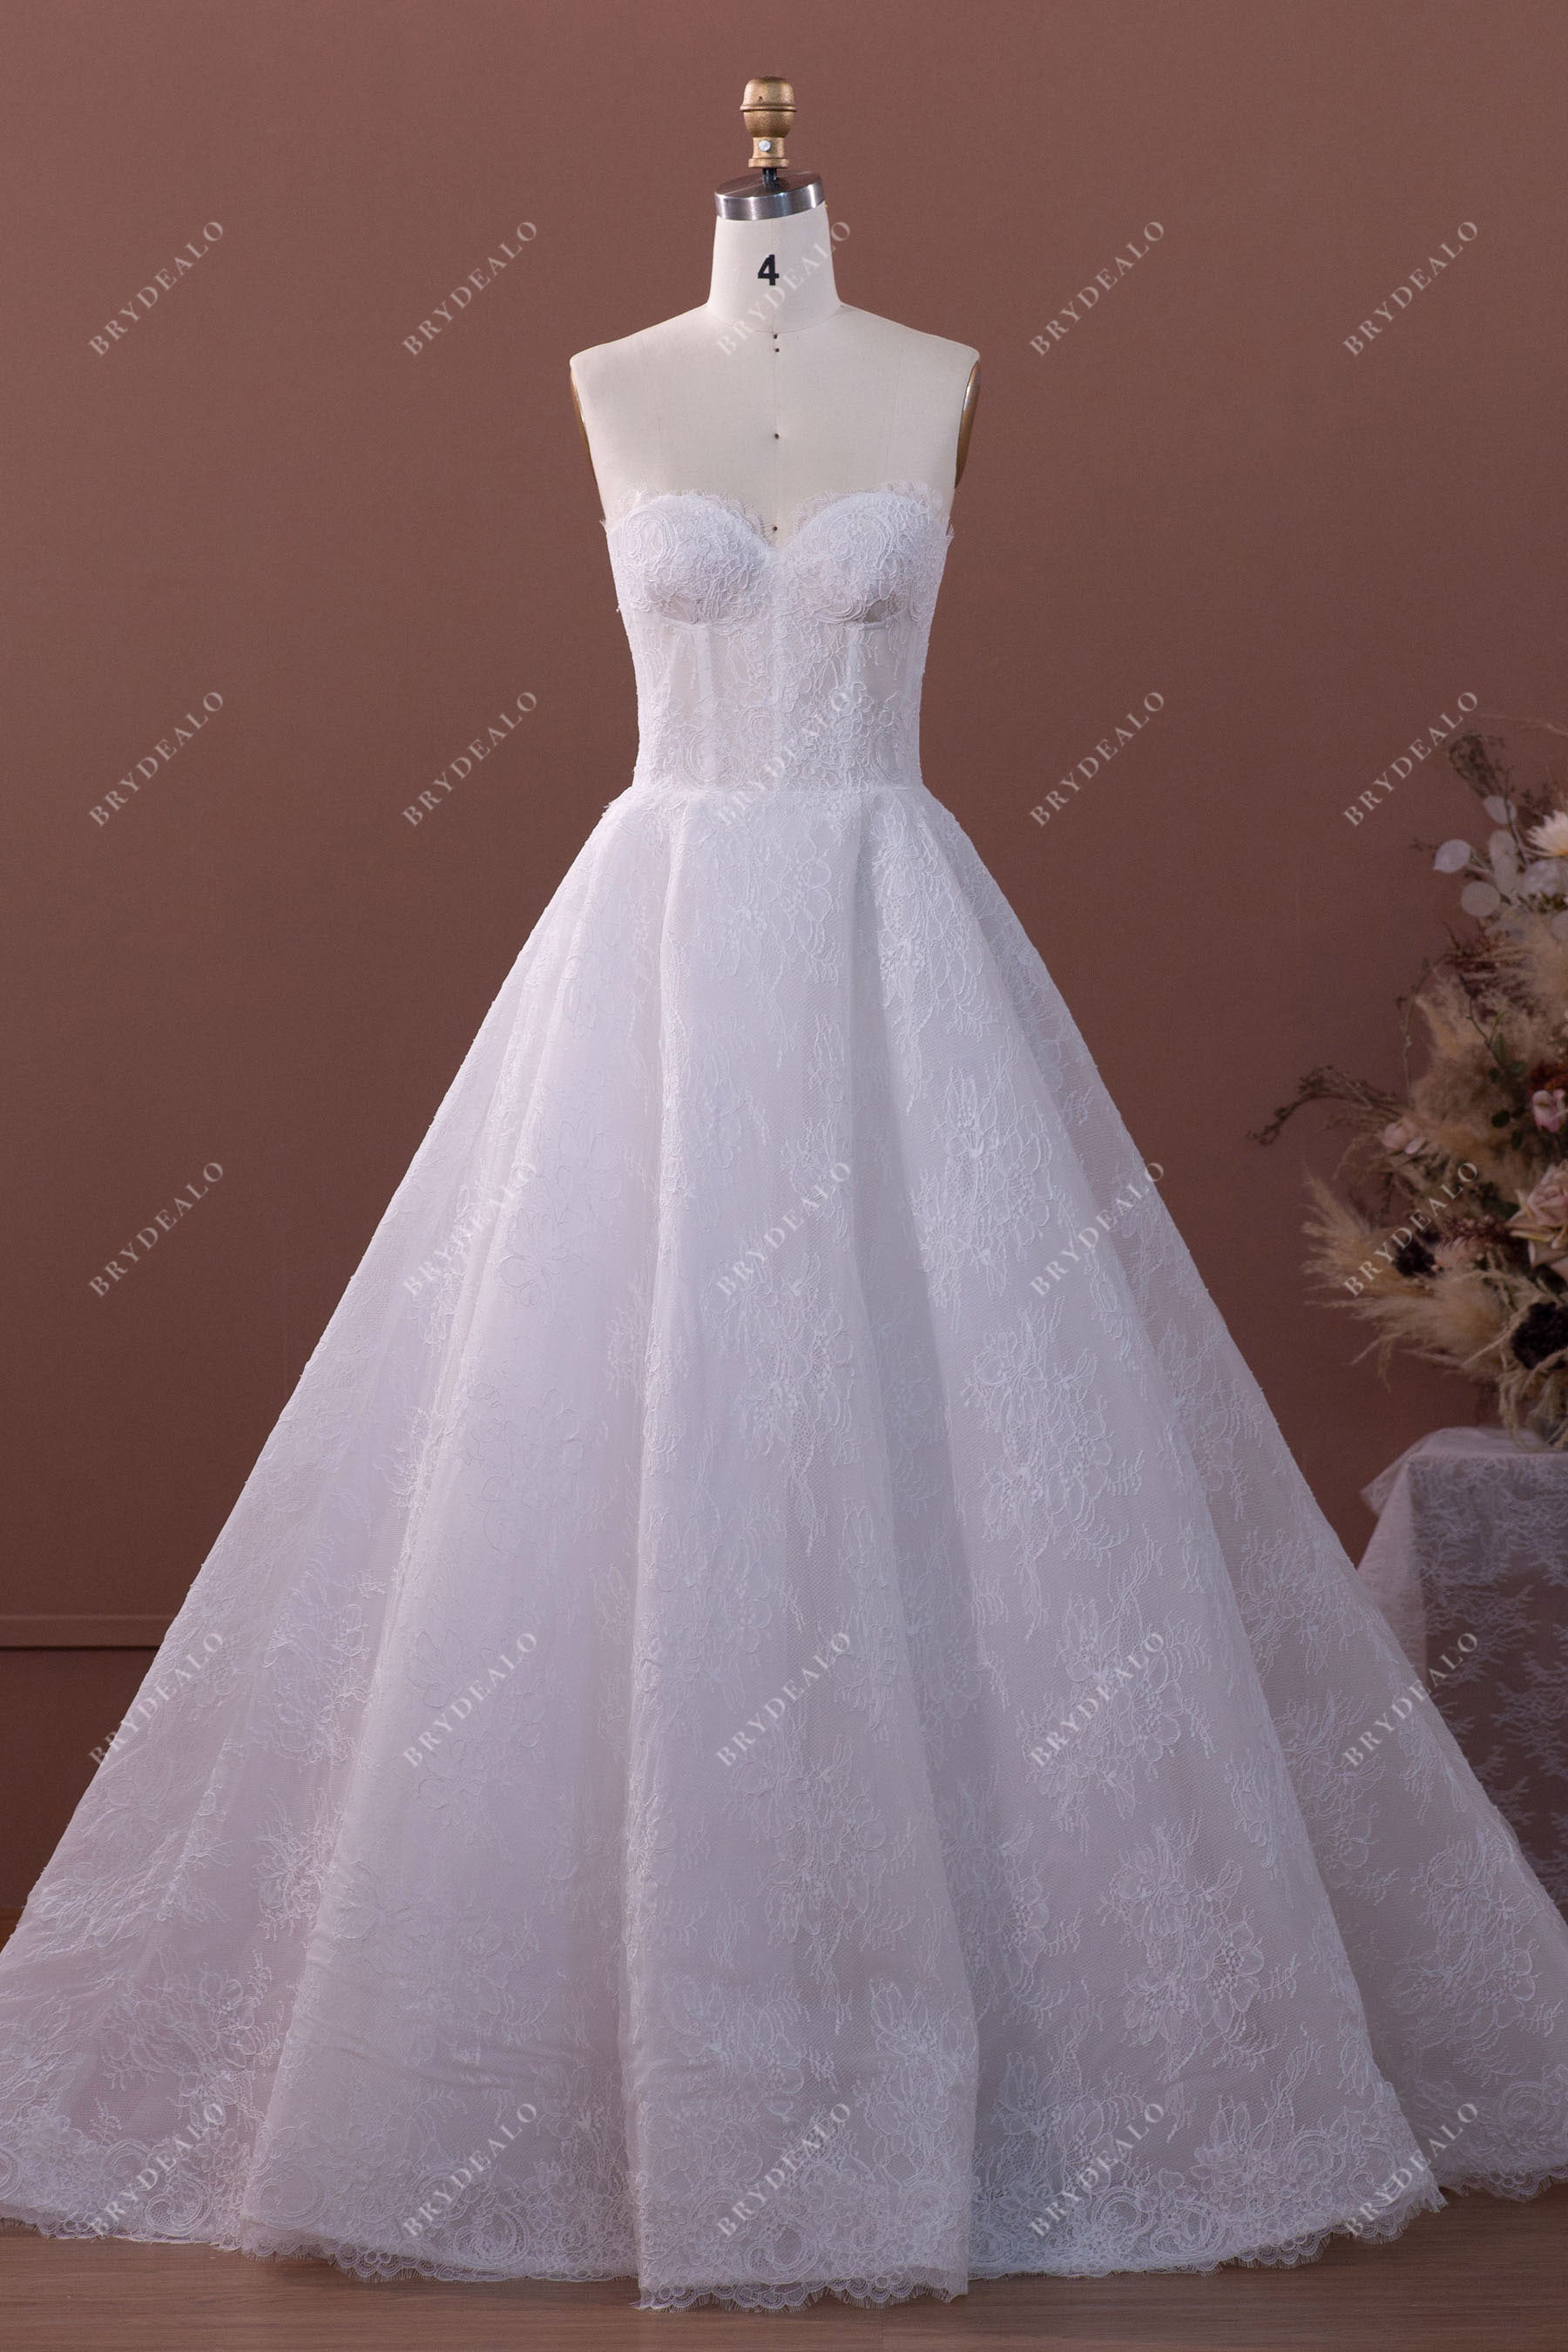 High-End Cording Flower Lace Sweetheart Puffy A-line Wedding Gown